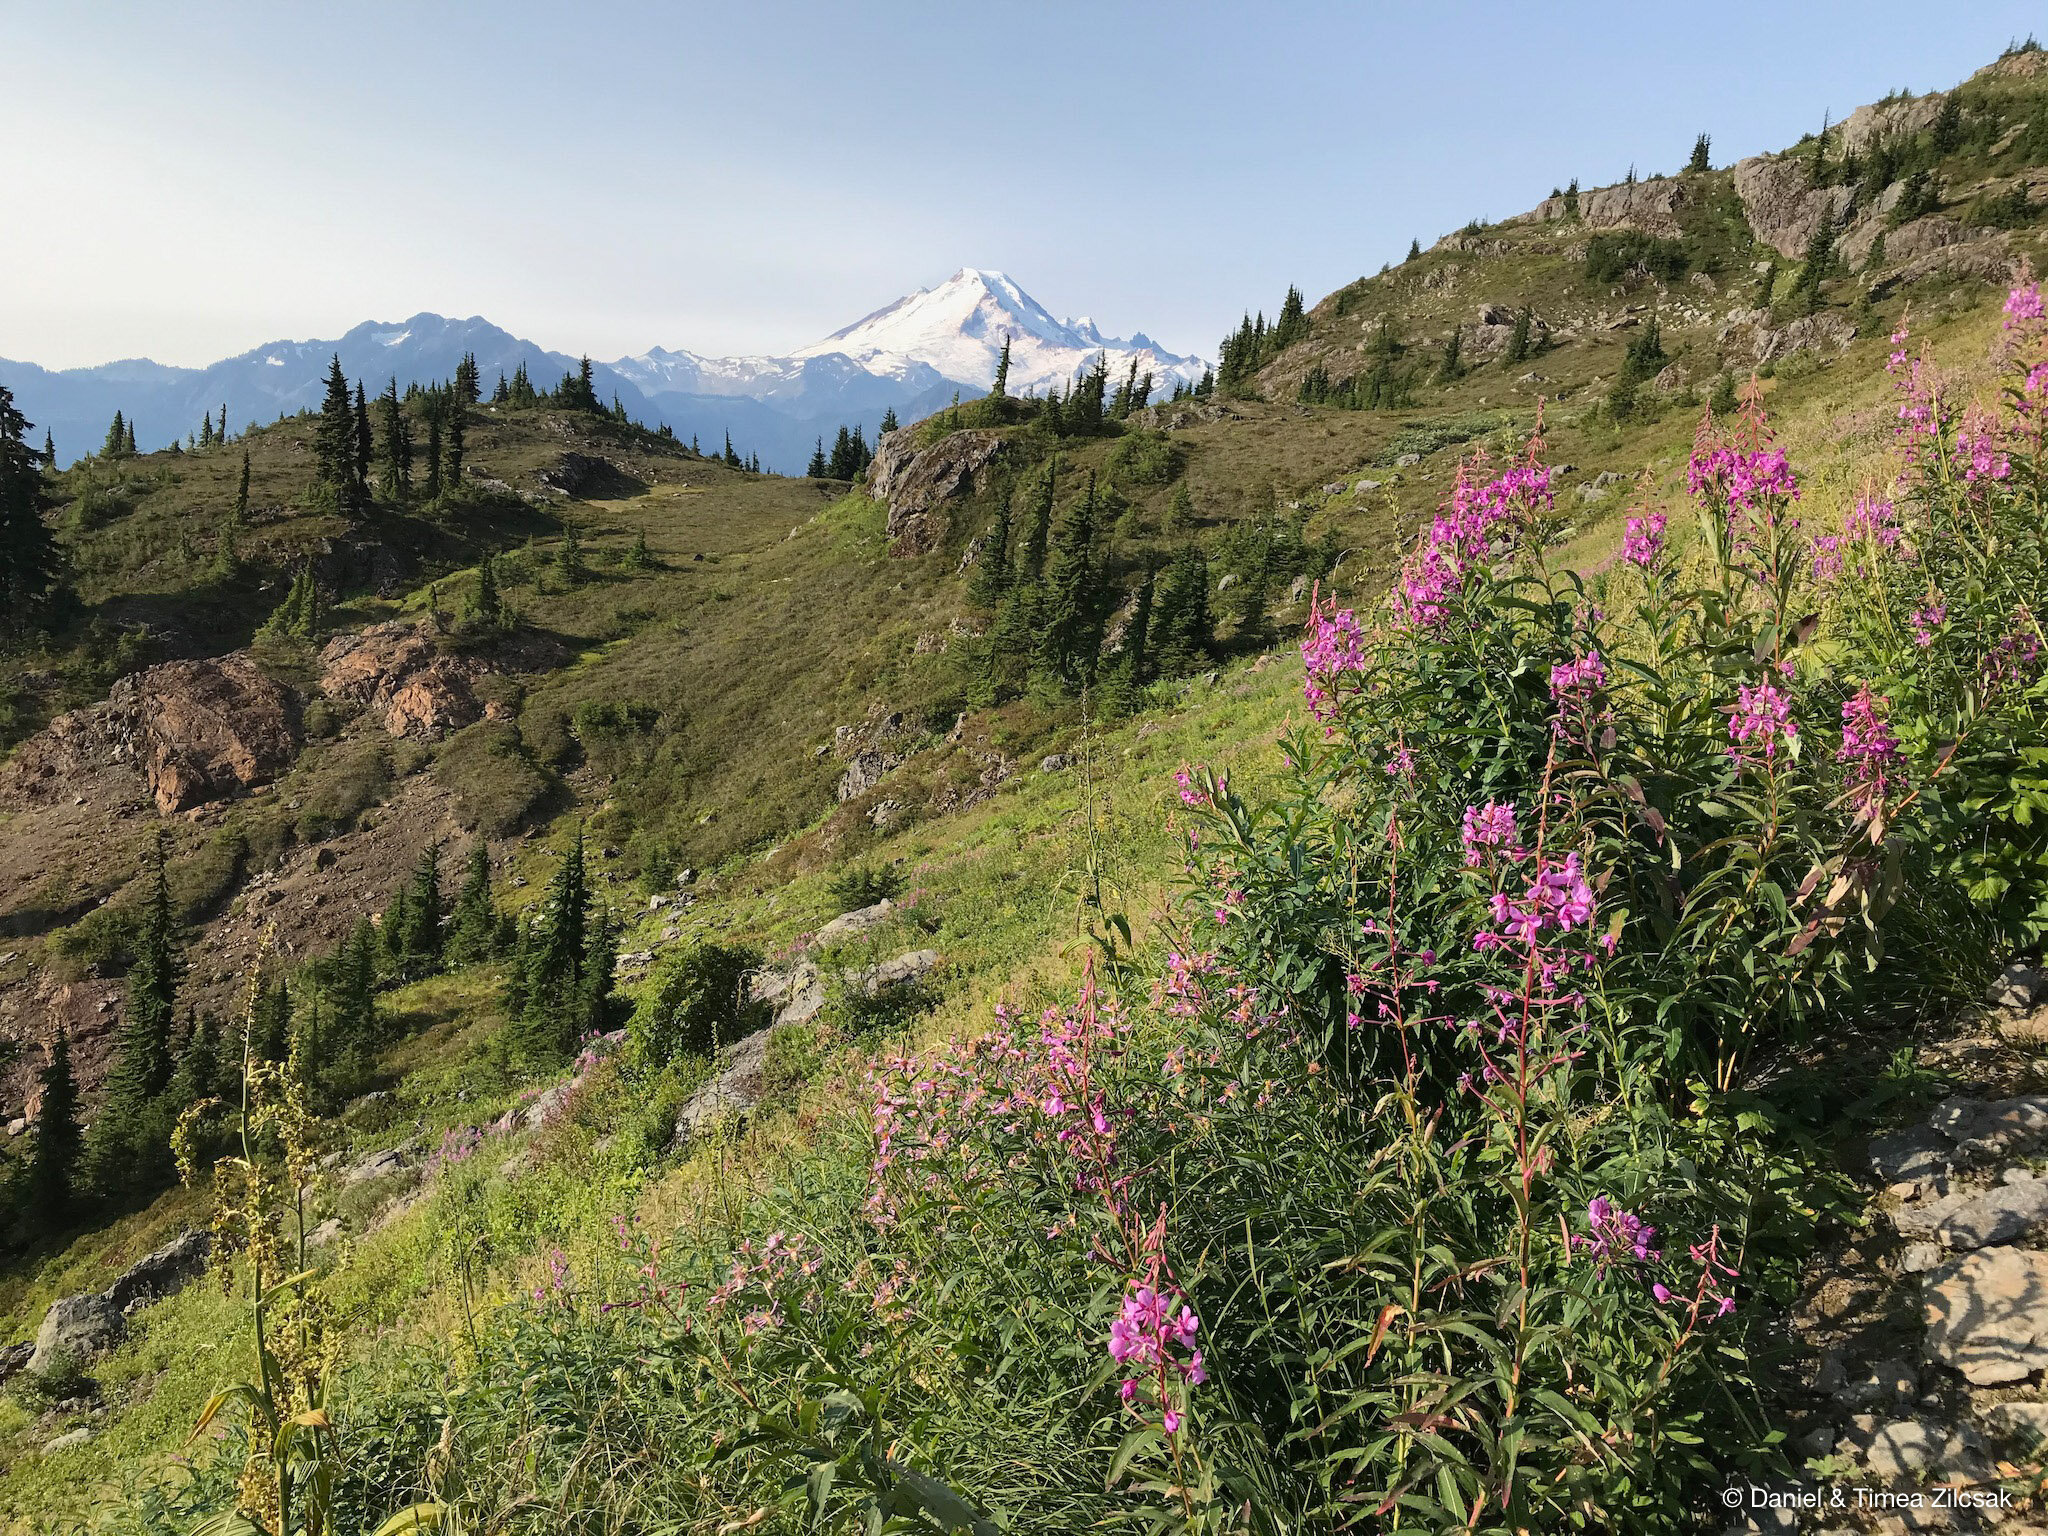 View of Mount Baker from the trail to Yellow Aster Butte